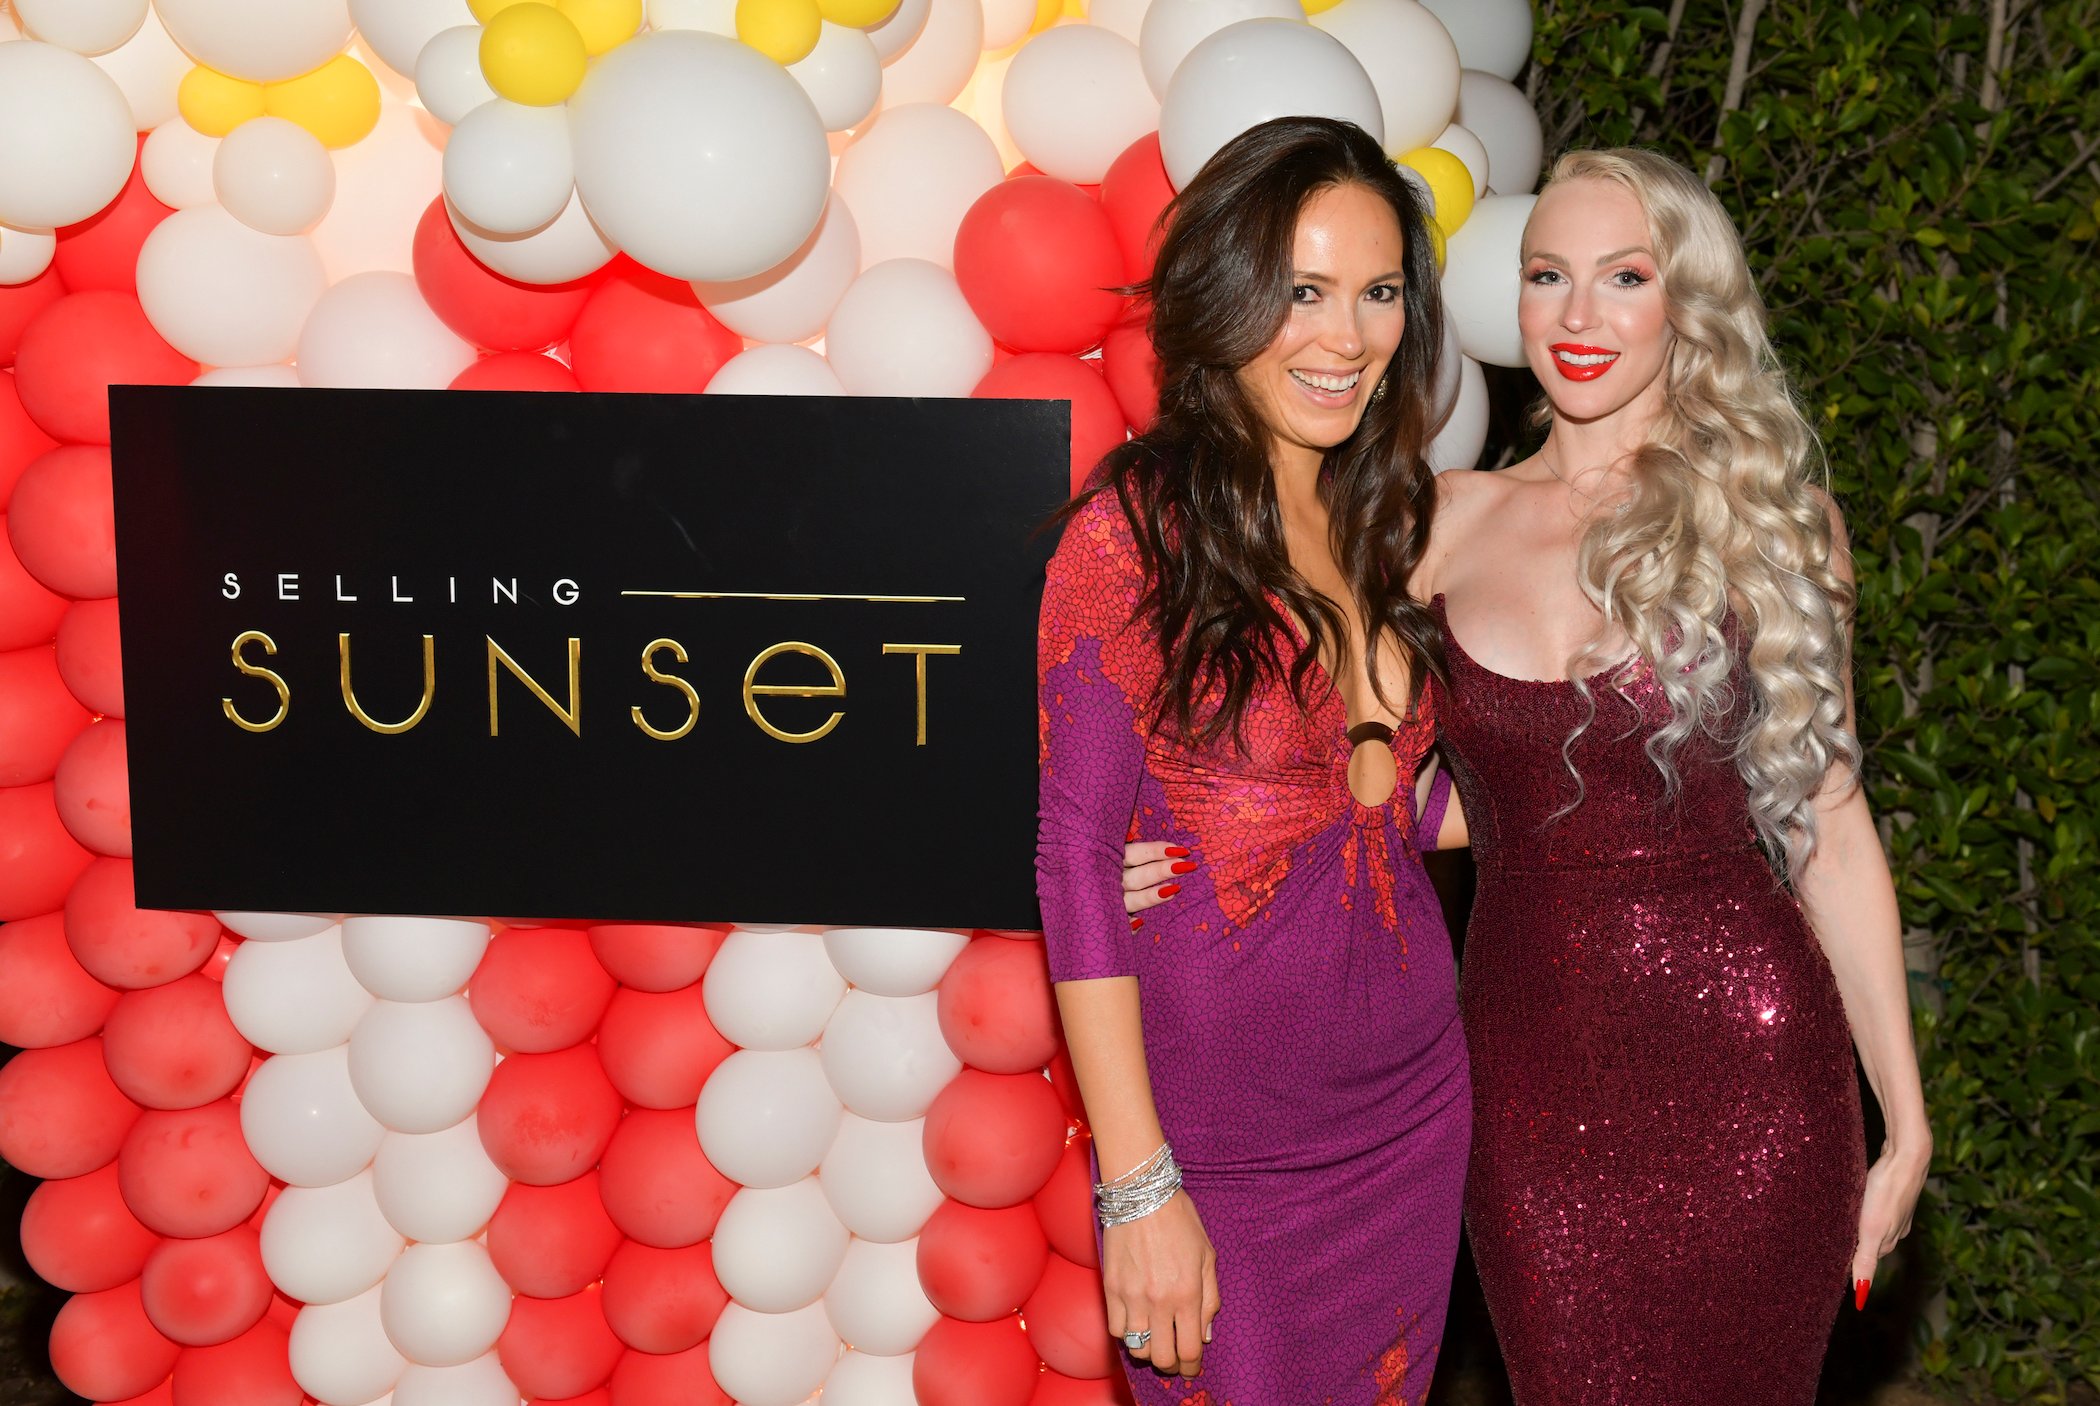 Davina Potratz (L) and Christine Quinn from Netflix's 'Selling Sunset' Season 4 at a viewing party with a 'Selling Sunset' sign next to them